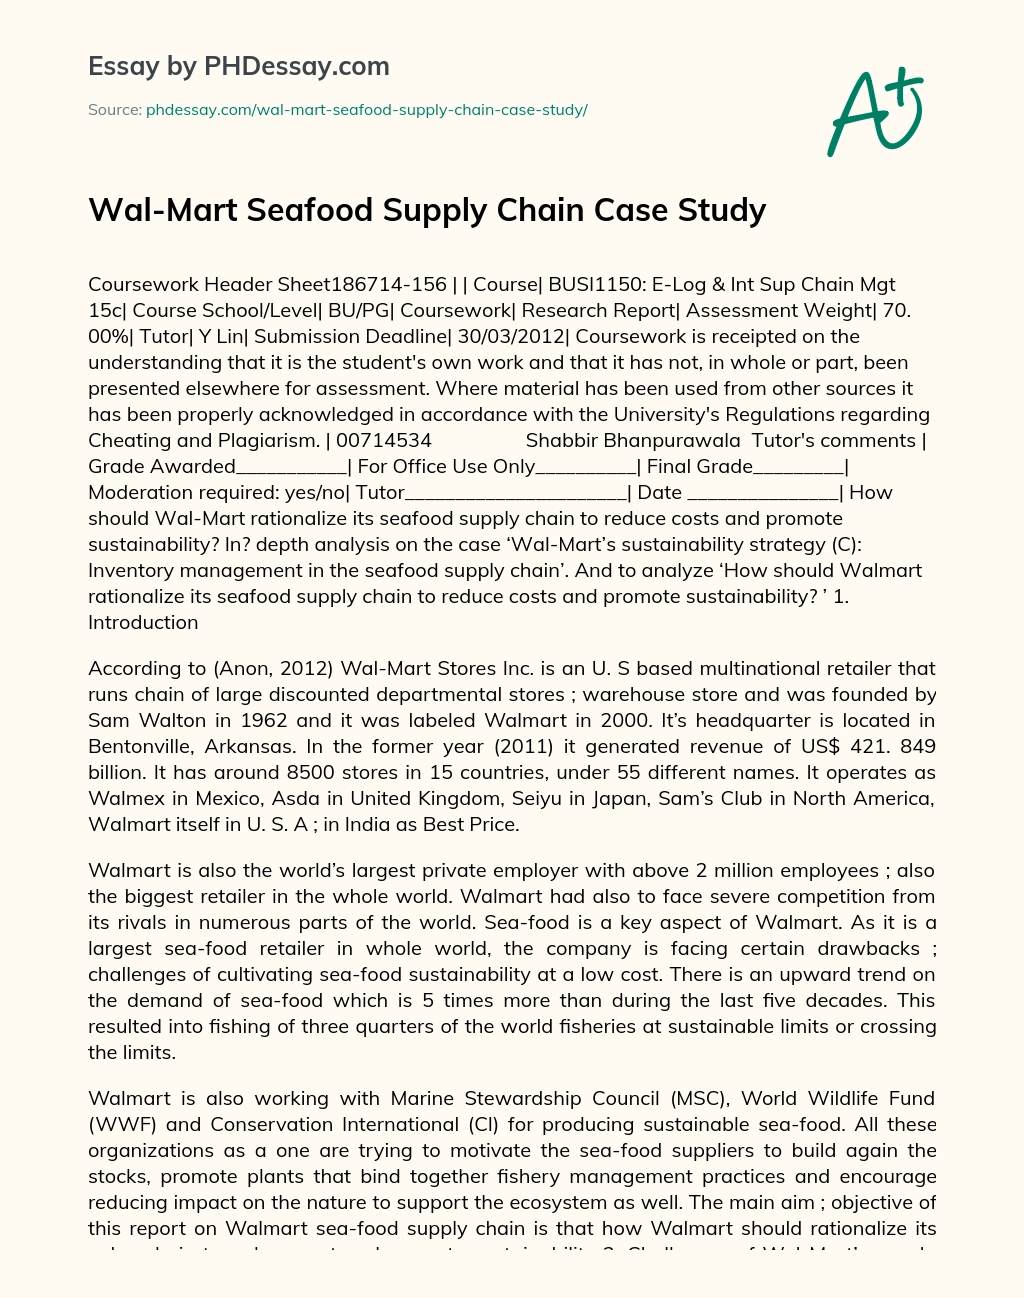 Wal-Mart Seafood Supply Chain Case Study essay